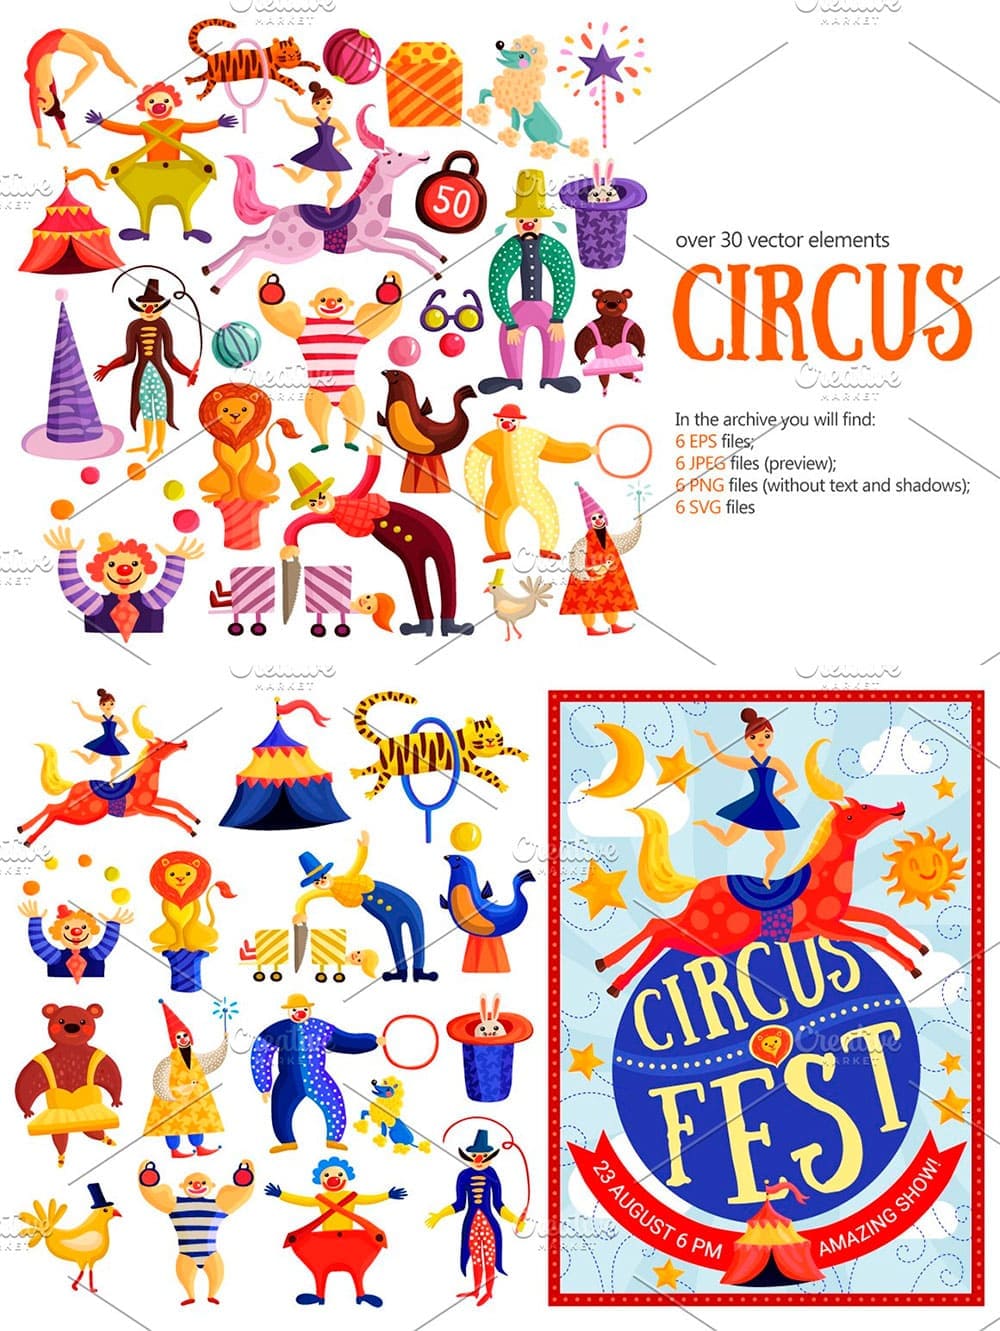 Circus flat set, picture for pinterest.